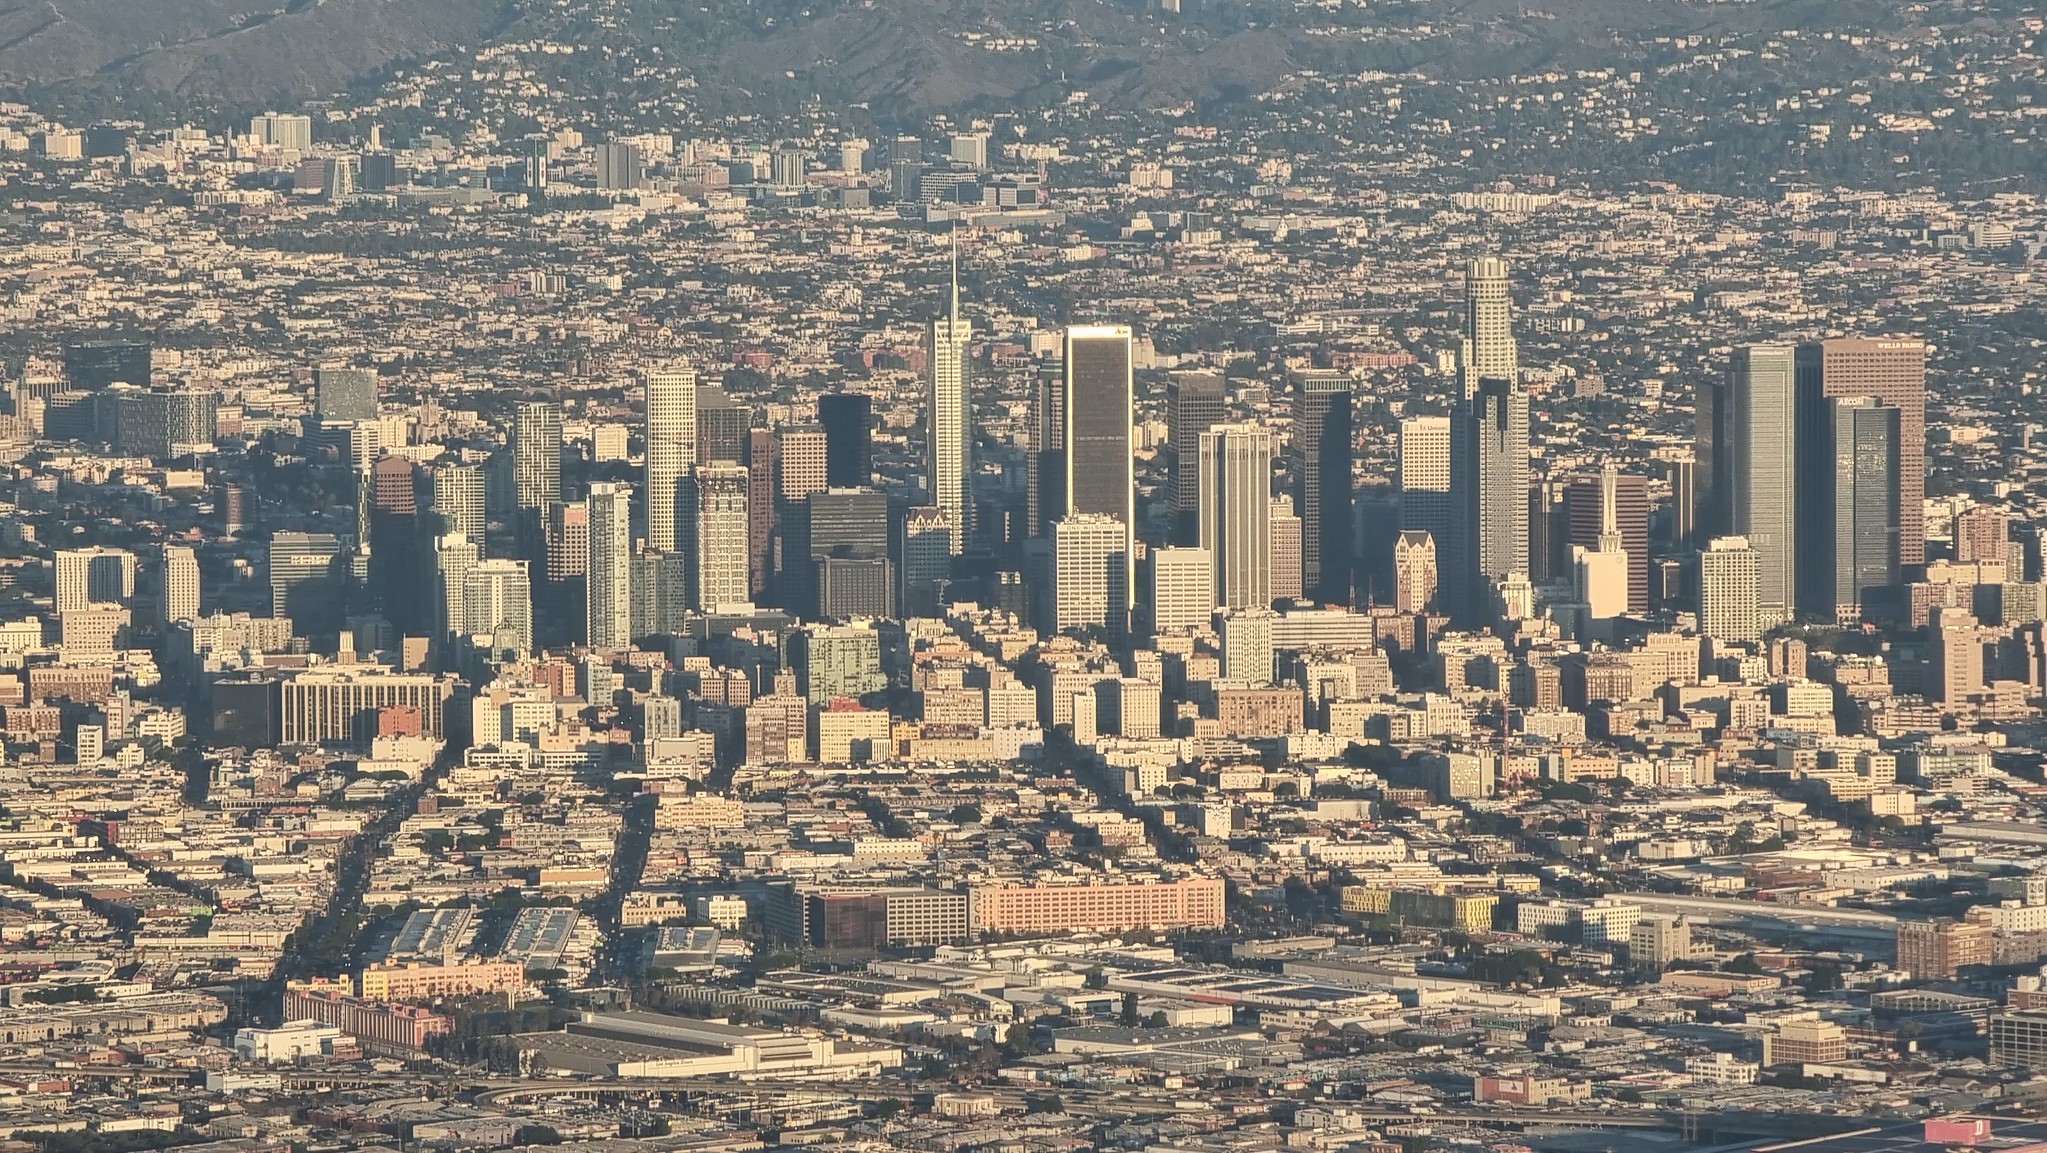 Nice views of Los Angeles on final approach into LAX